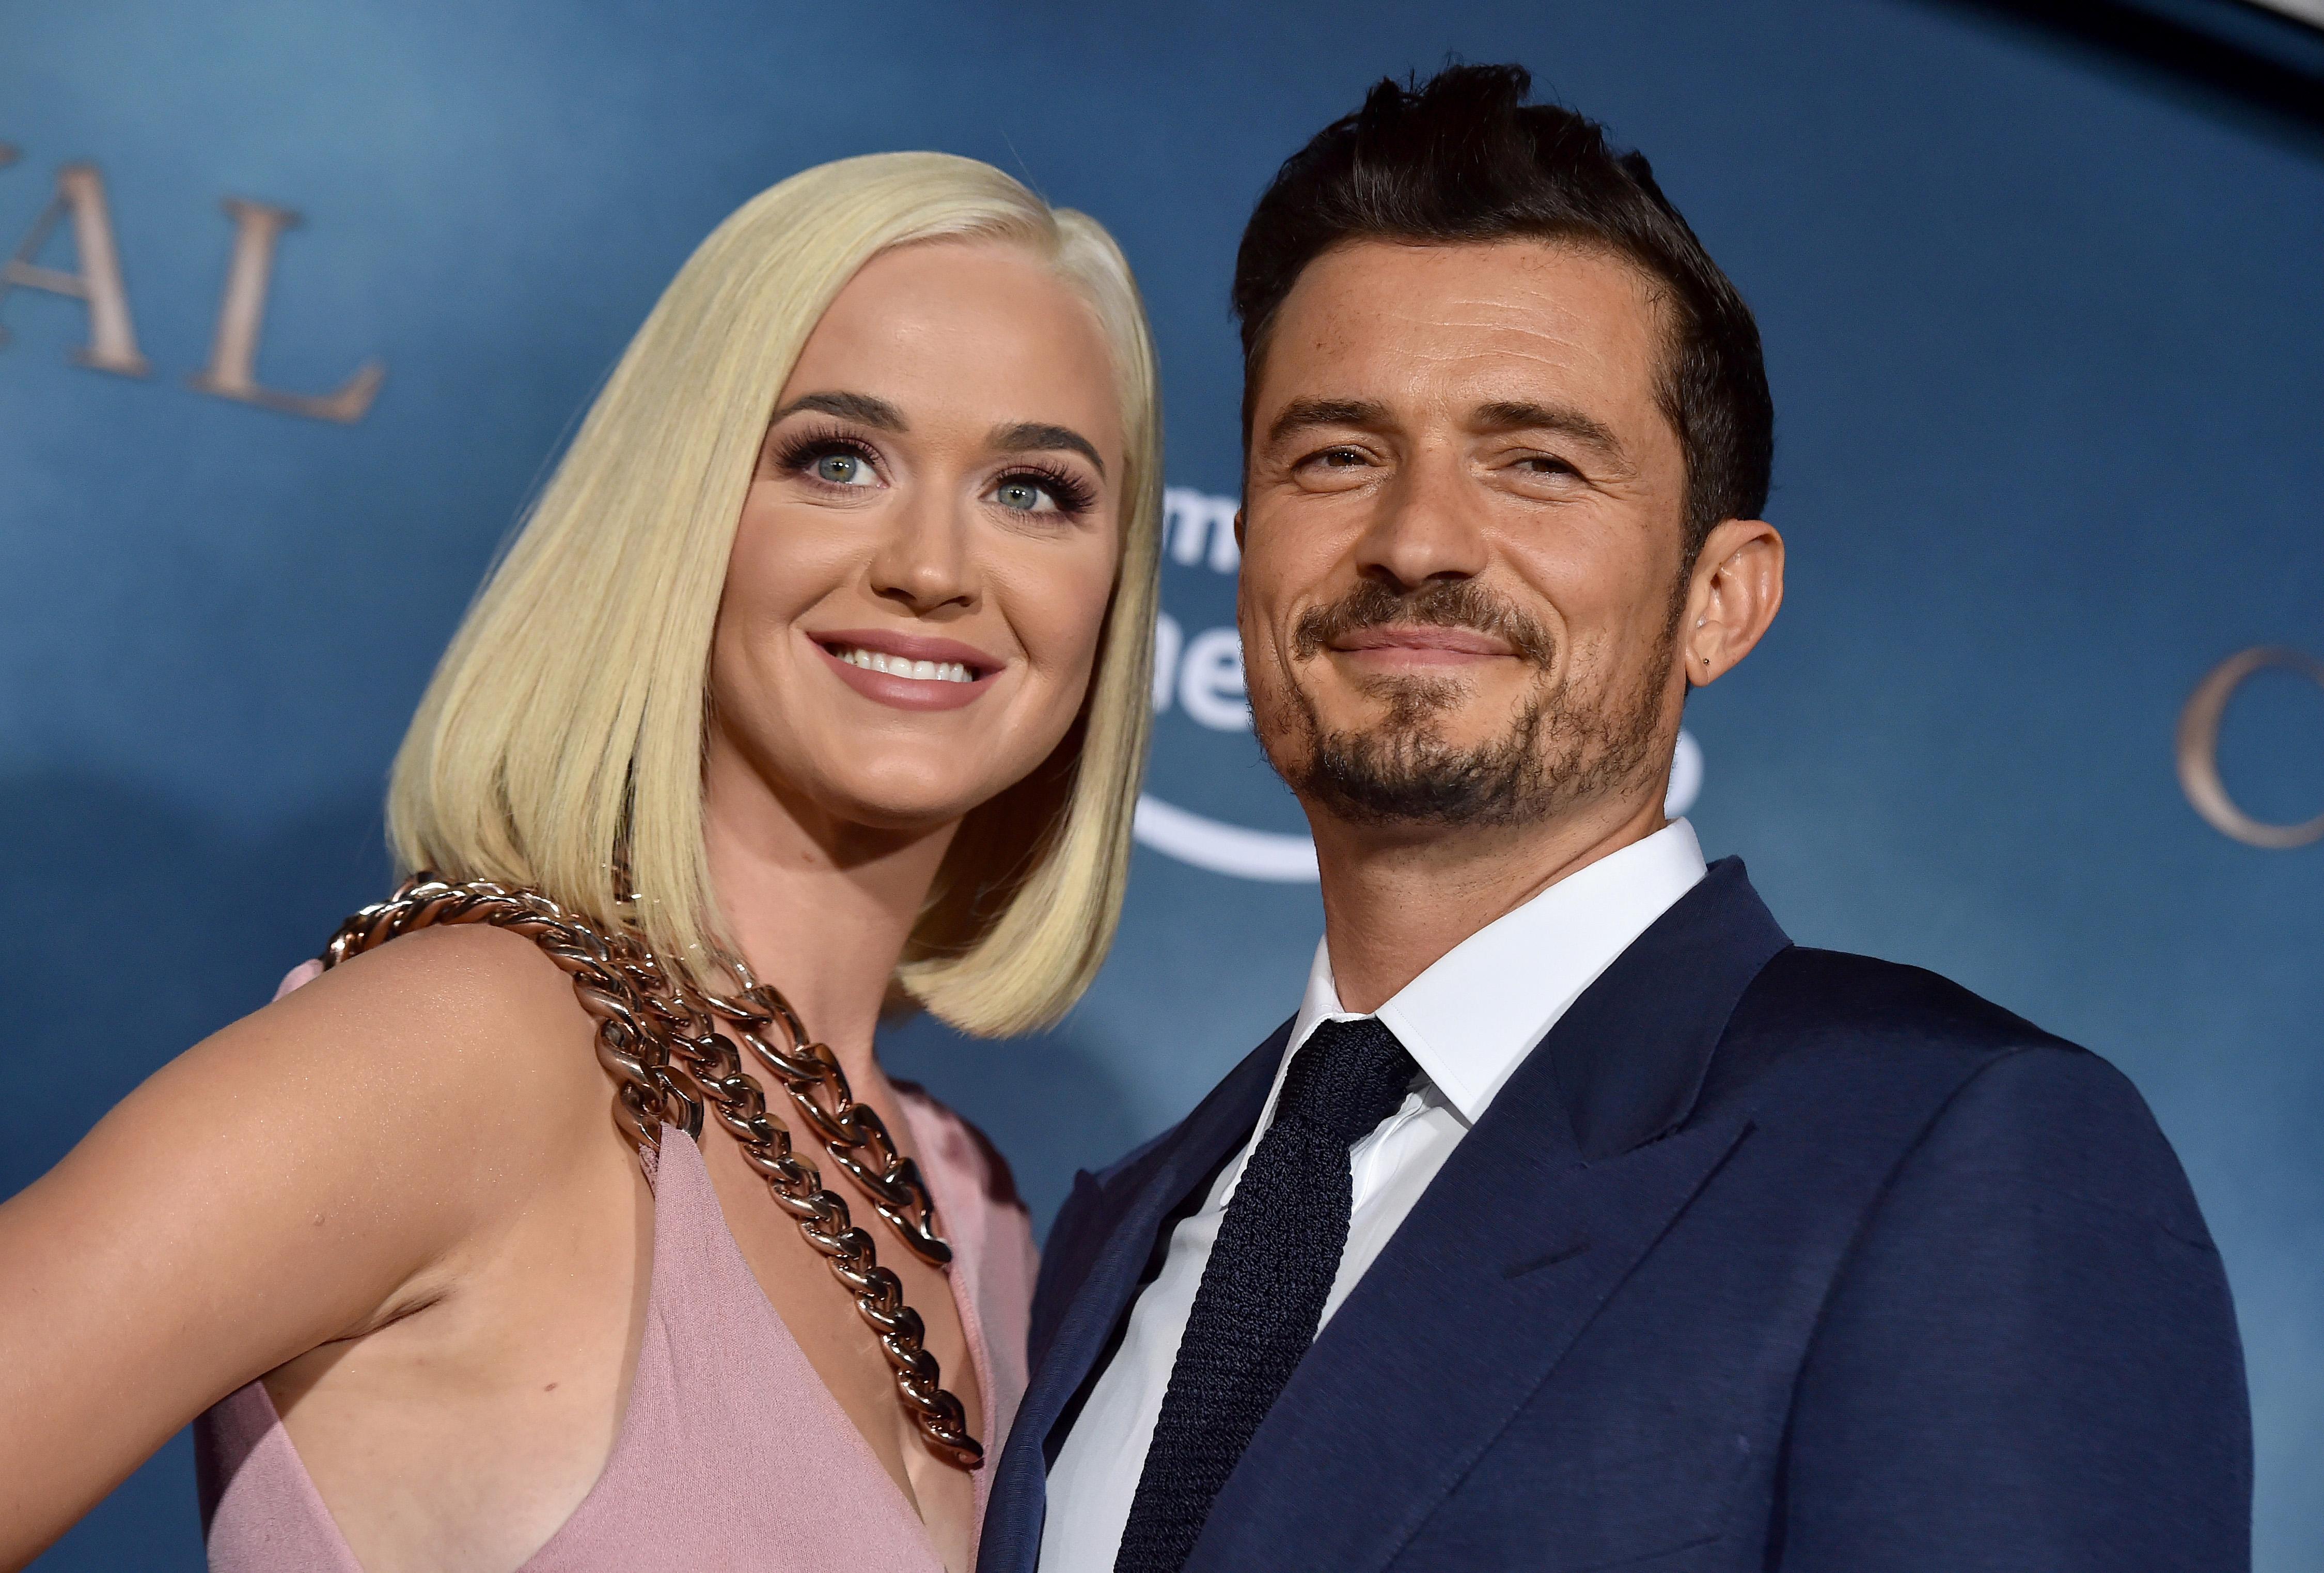 Orlando Bloom Explains That He Was 6 Months Celibate And Porn-Free Before Dating Katy Perry